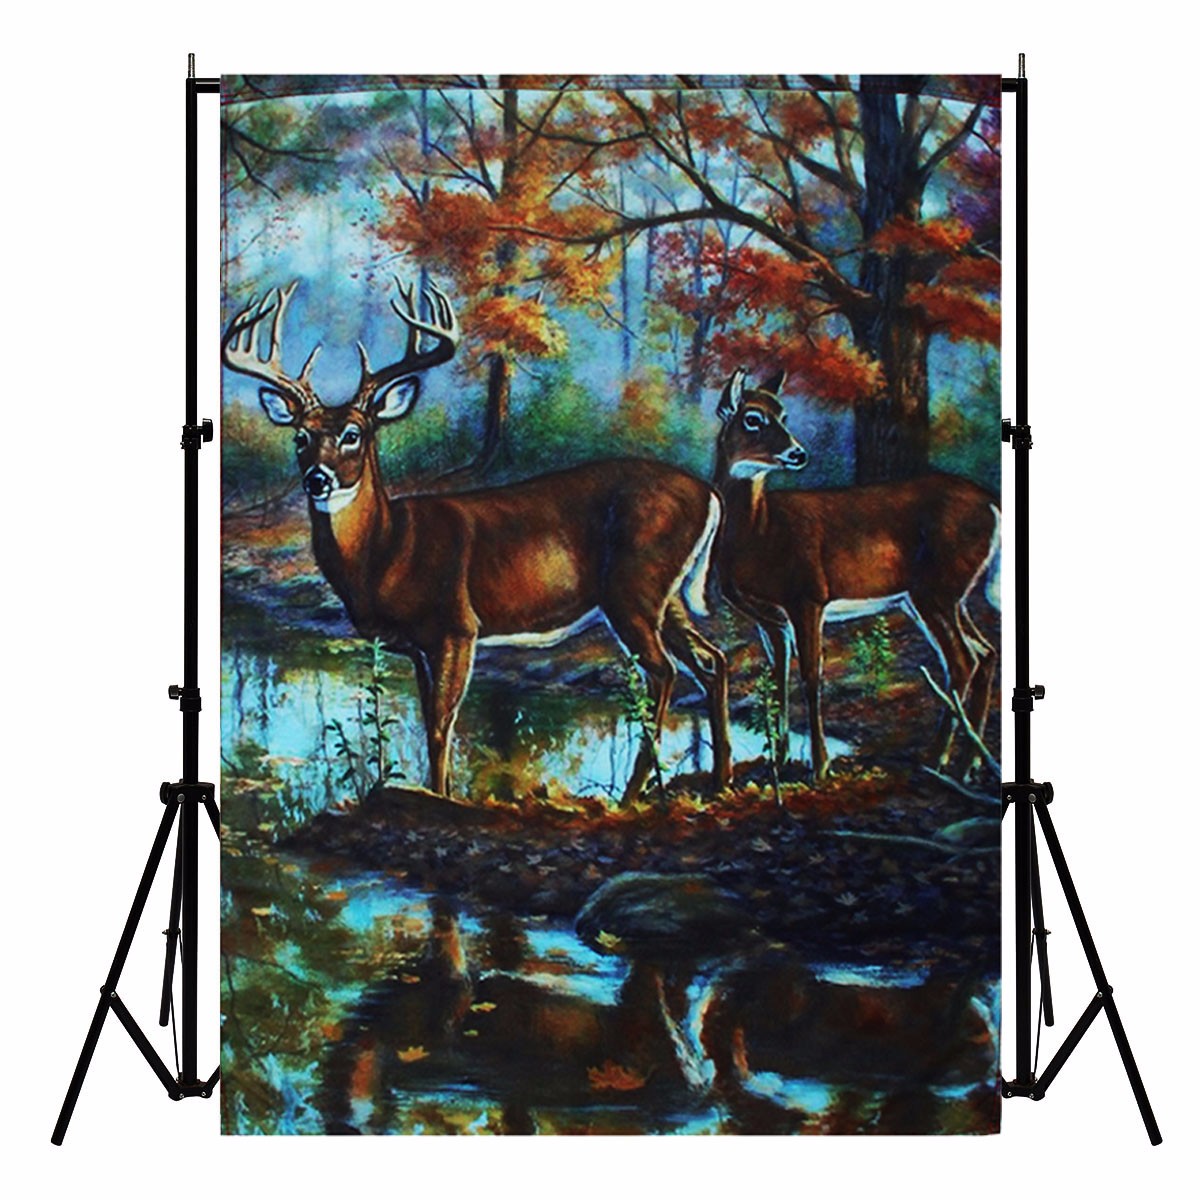 Deer-Flag-Banner-Garden-Yard-Home-Party-28-x-40-Inch-Forest-House-Decorations-Art-1642461-4